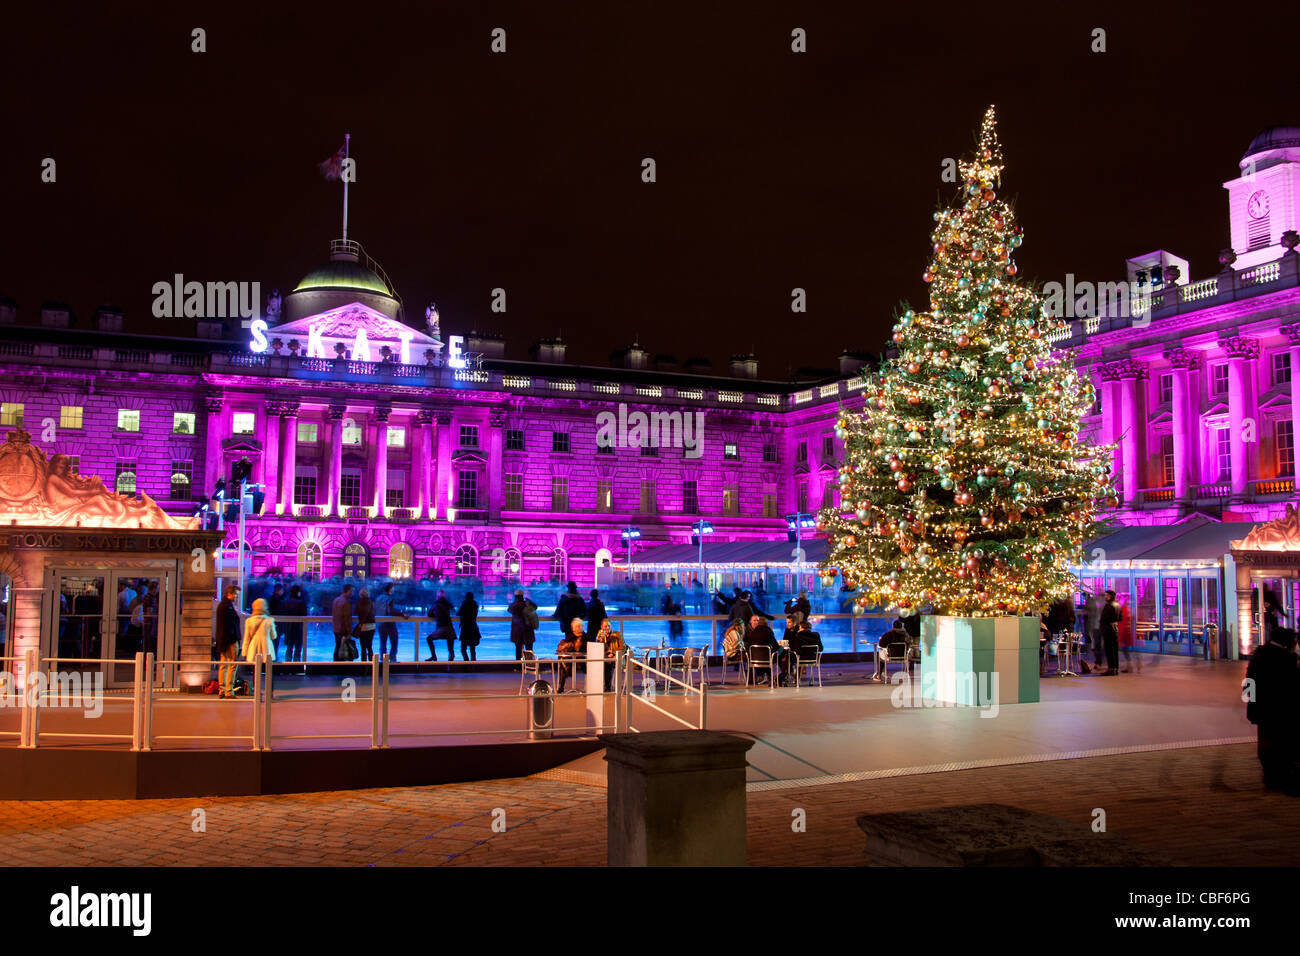 Somerset House Christmas ice rink with tree and people skating at night December 2011 The Strand London England UK Stock Photo